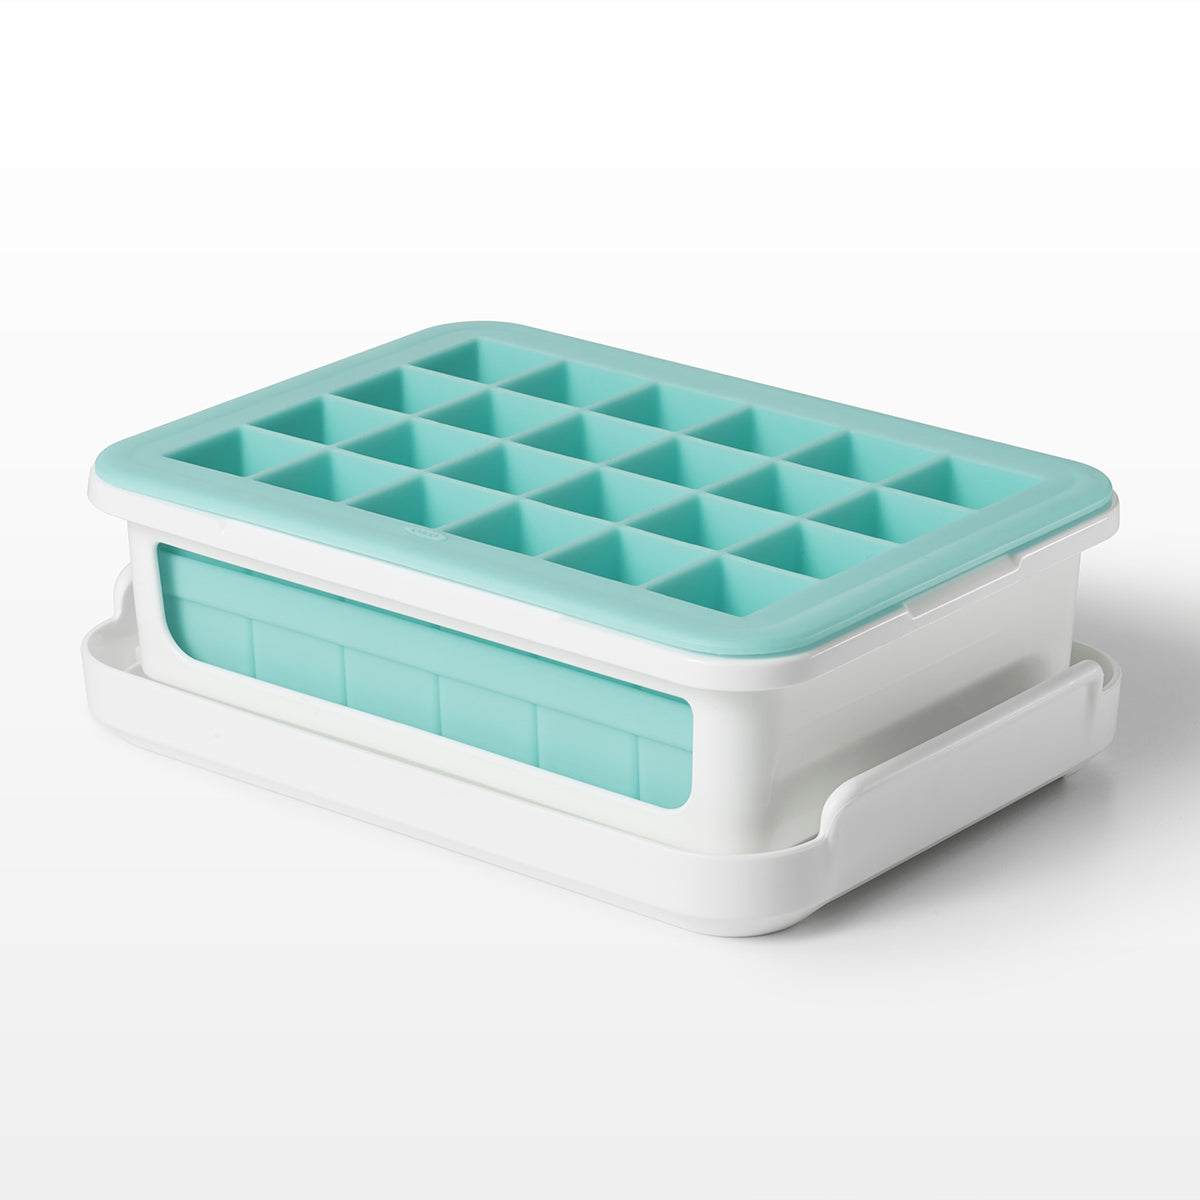 Food Grade Silicone Ice Cube Tray Include Non Spill Lids and Storage Bin  for Freezer, One